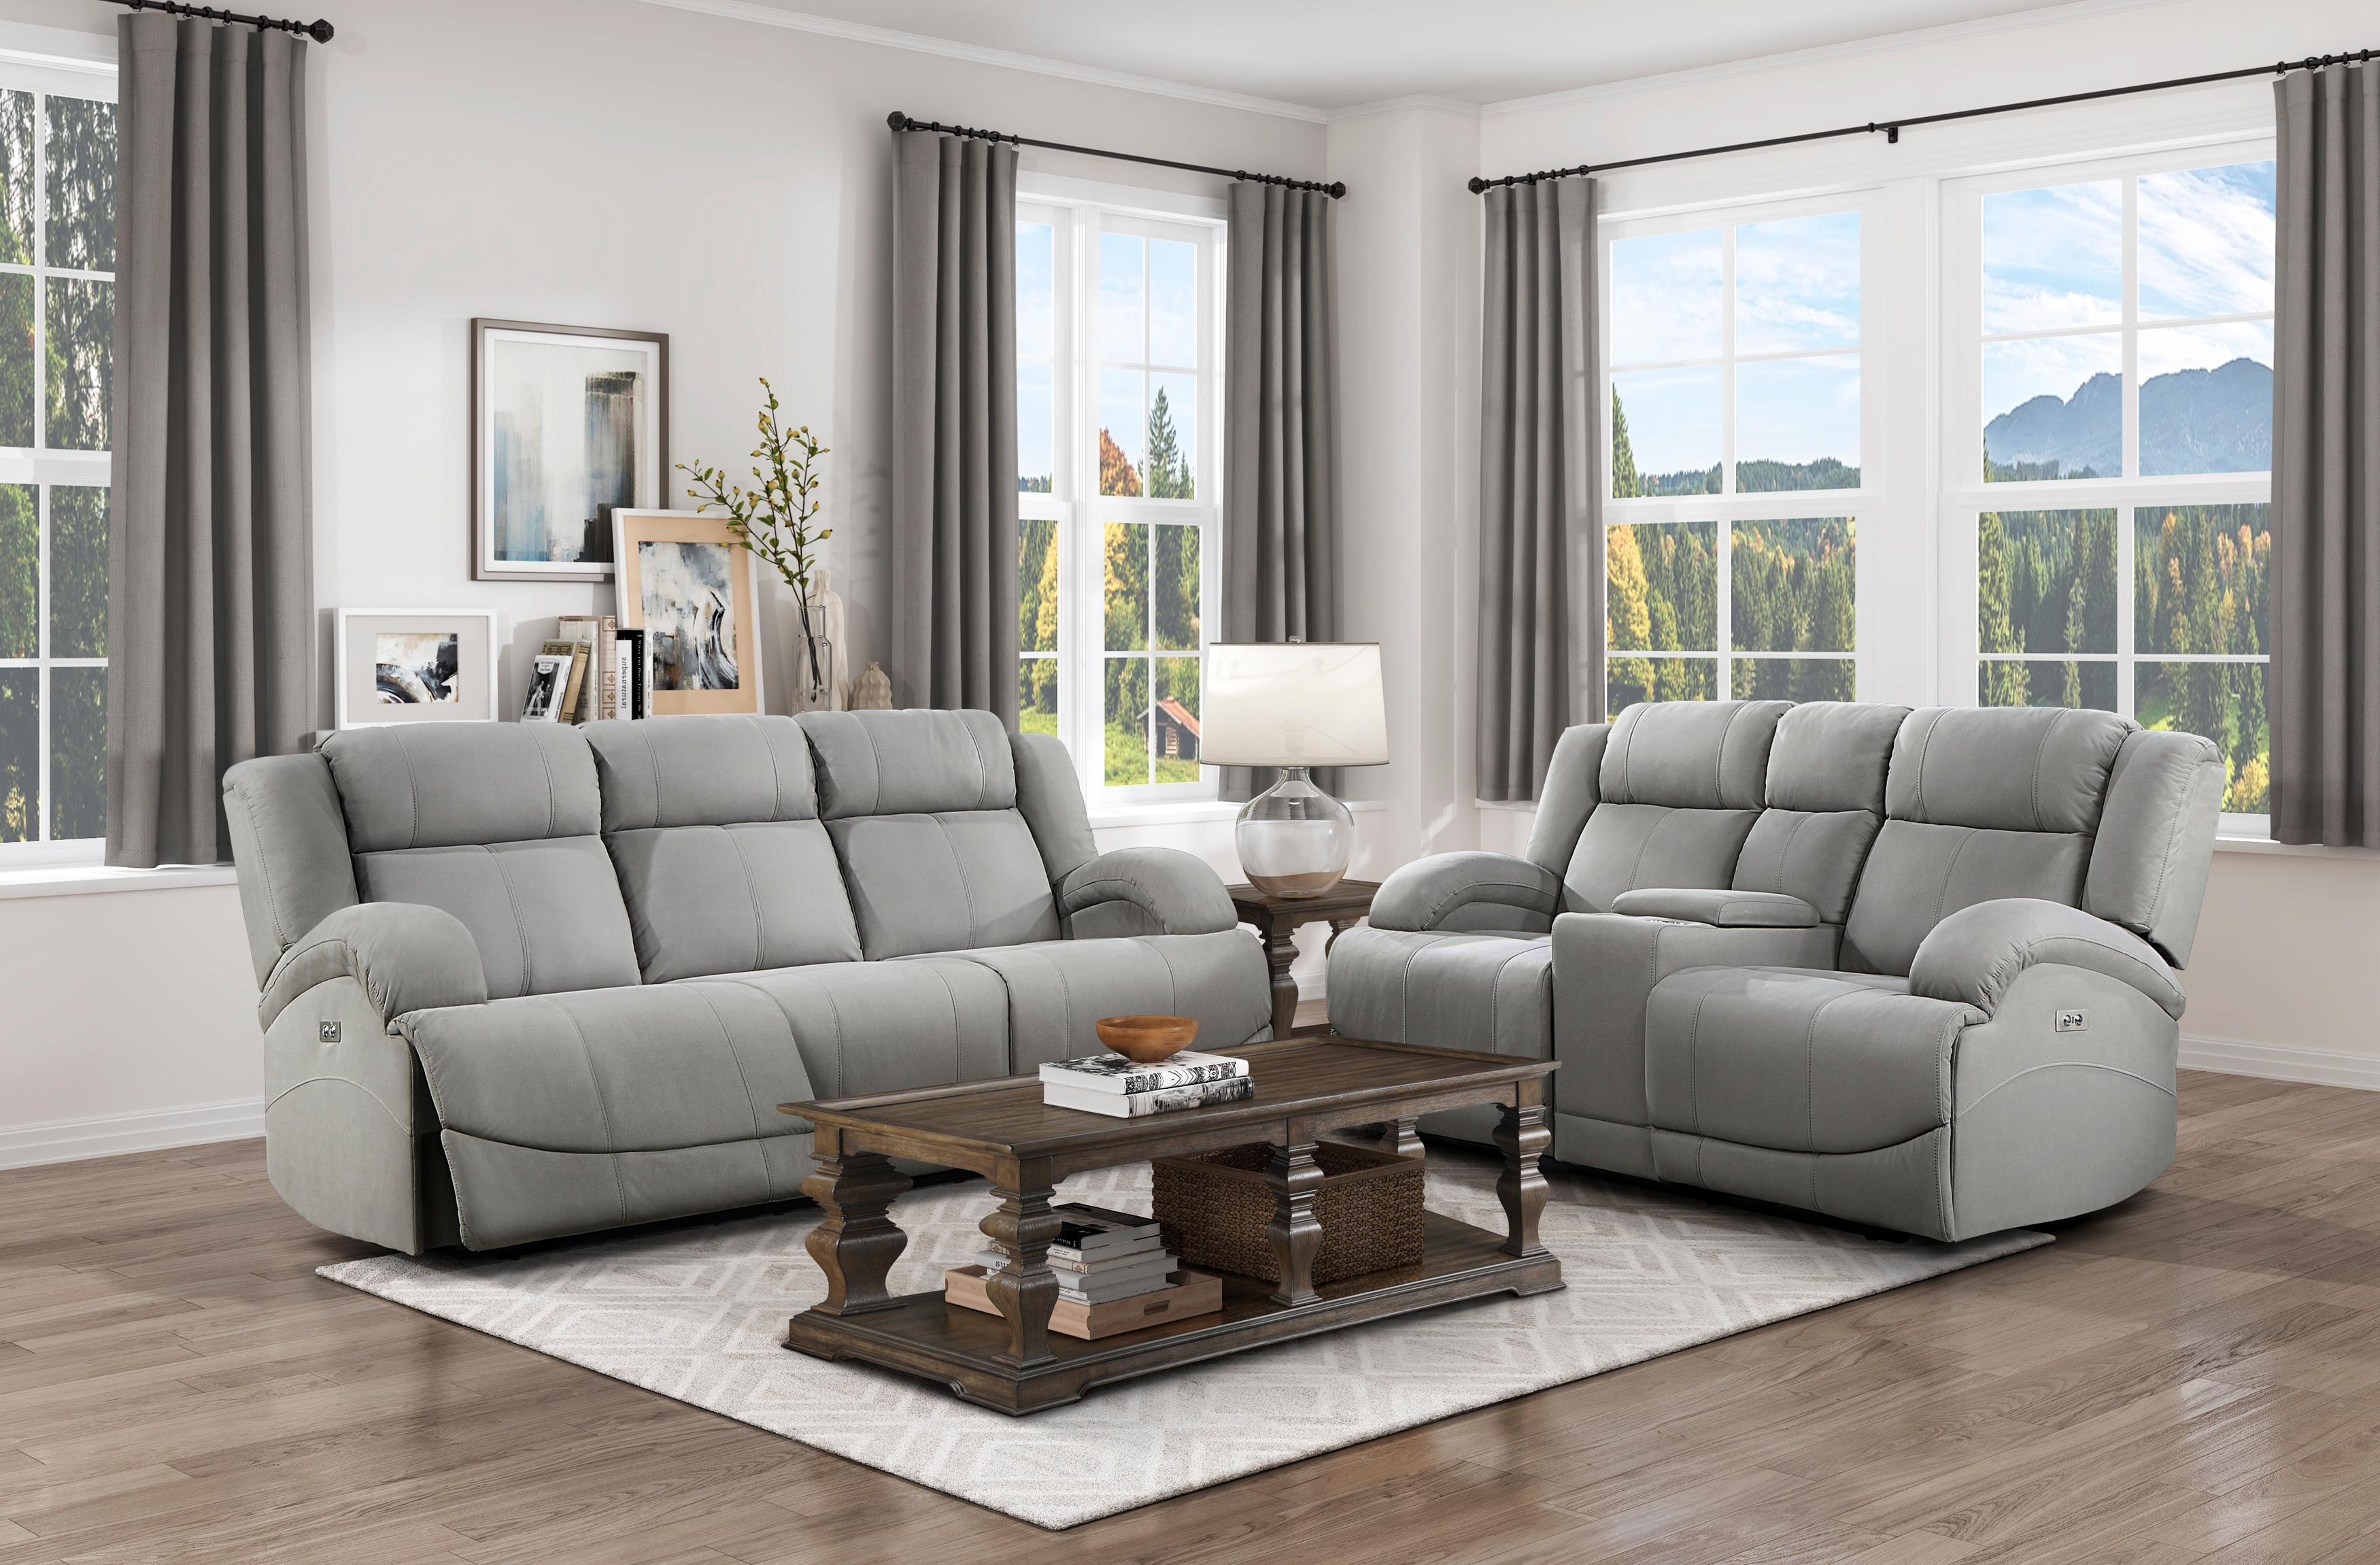 Transitional Reclining Set 9207GRY-2PC Camryn 9207GRY-2PC in Gray Microfiber